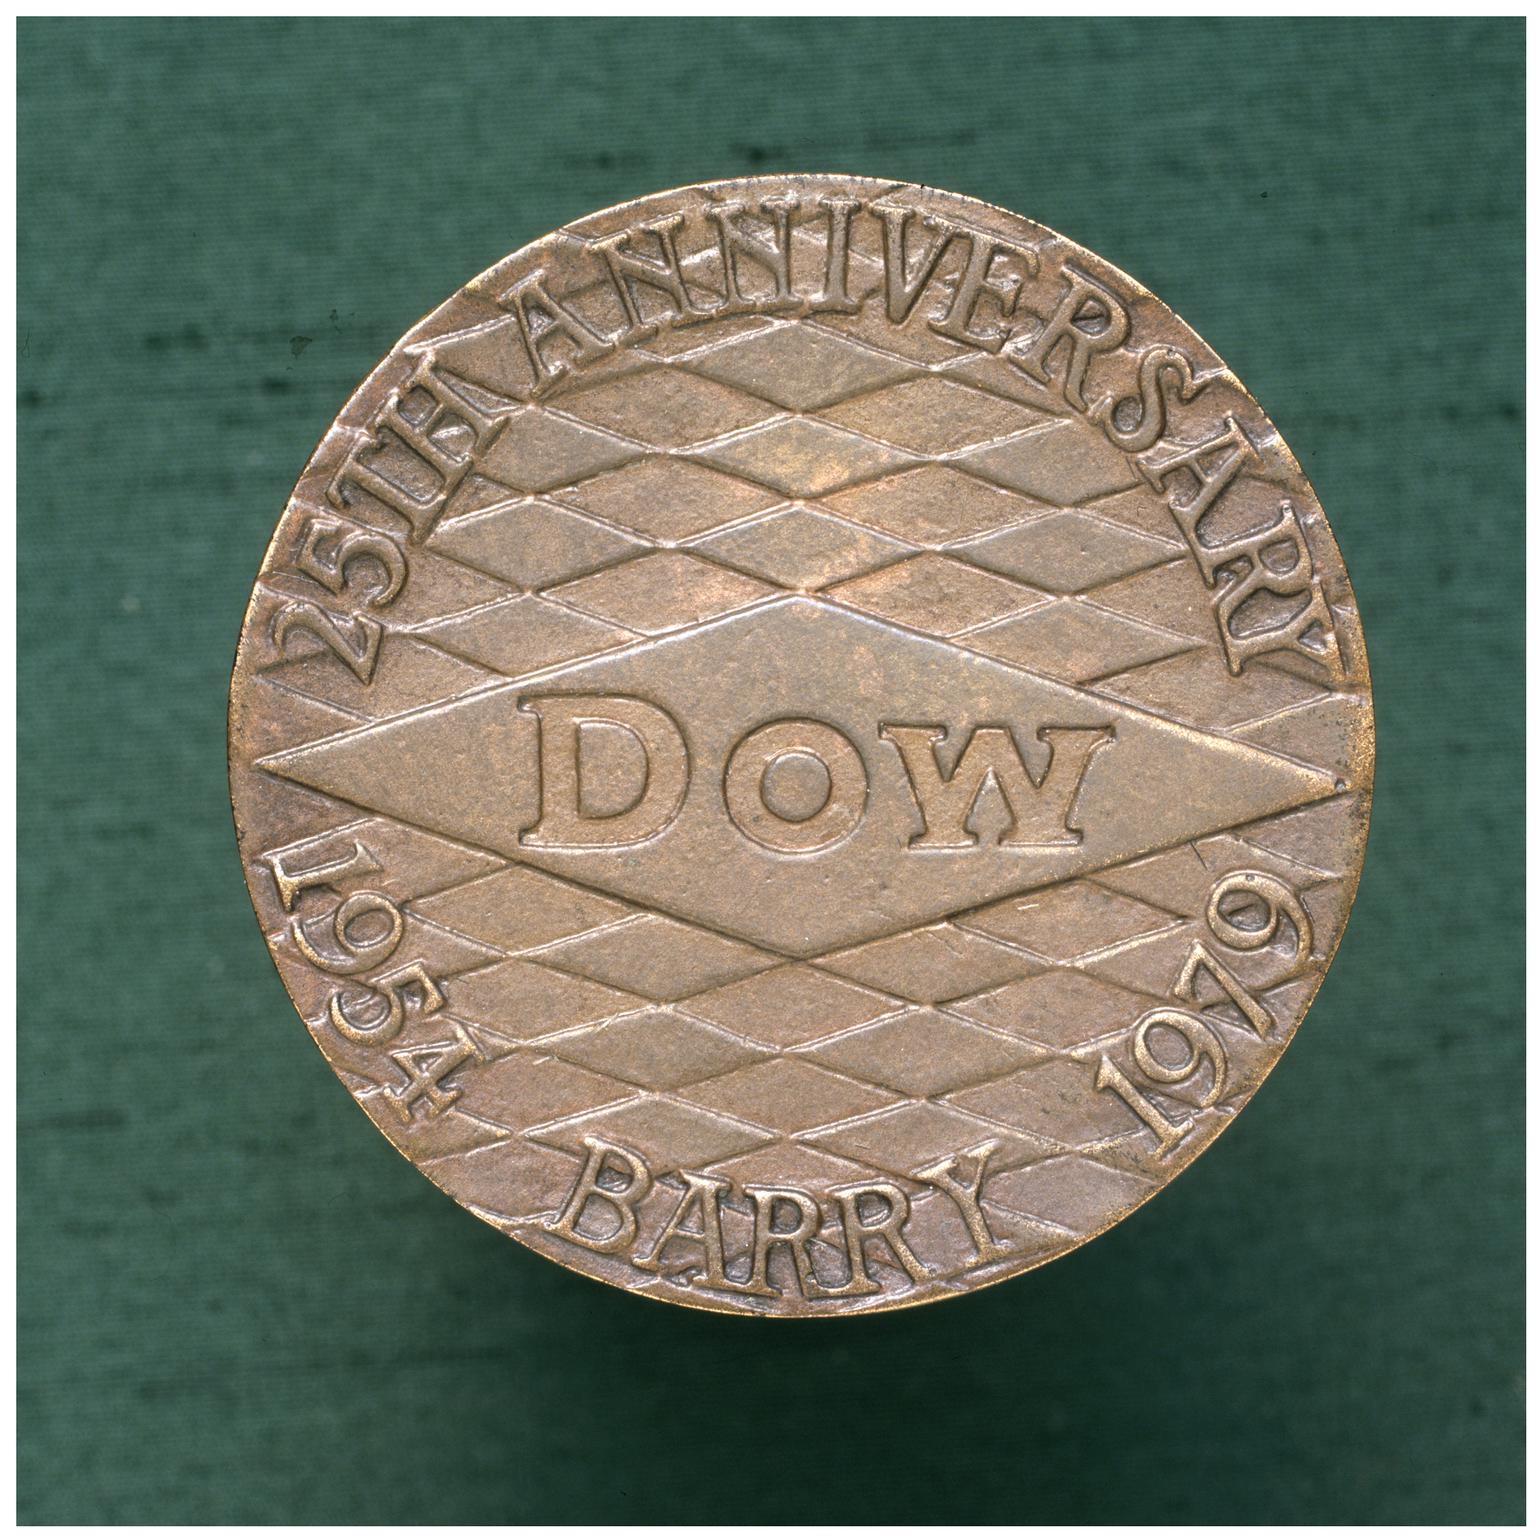 Dow Chemical Co. Ltd, Barry 25th anniversary medal